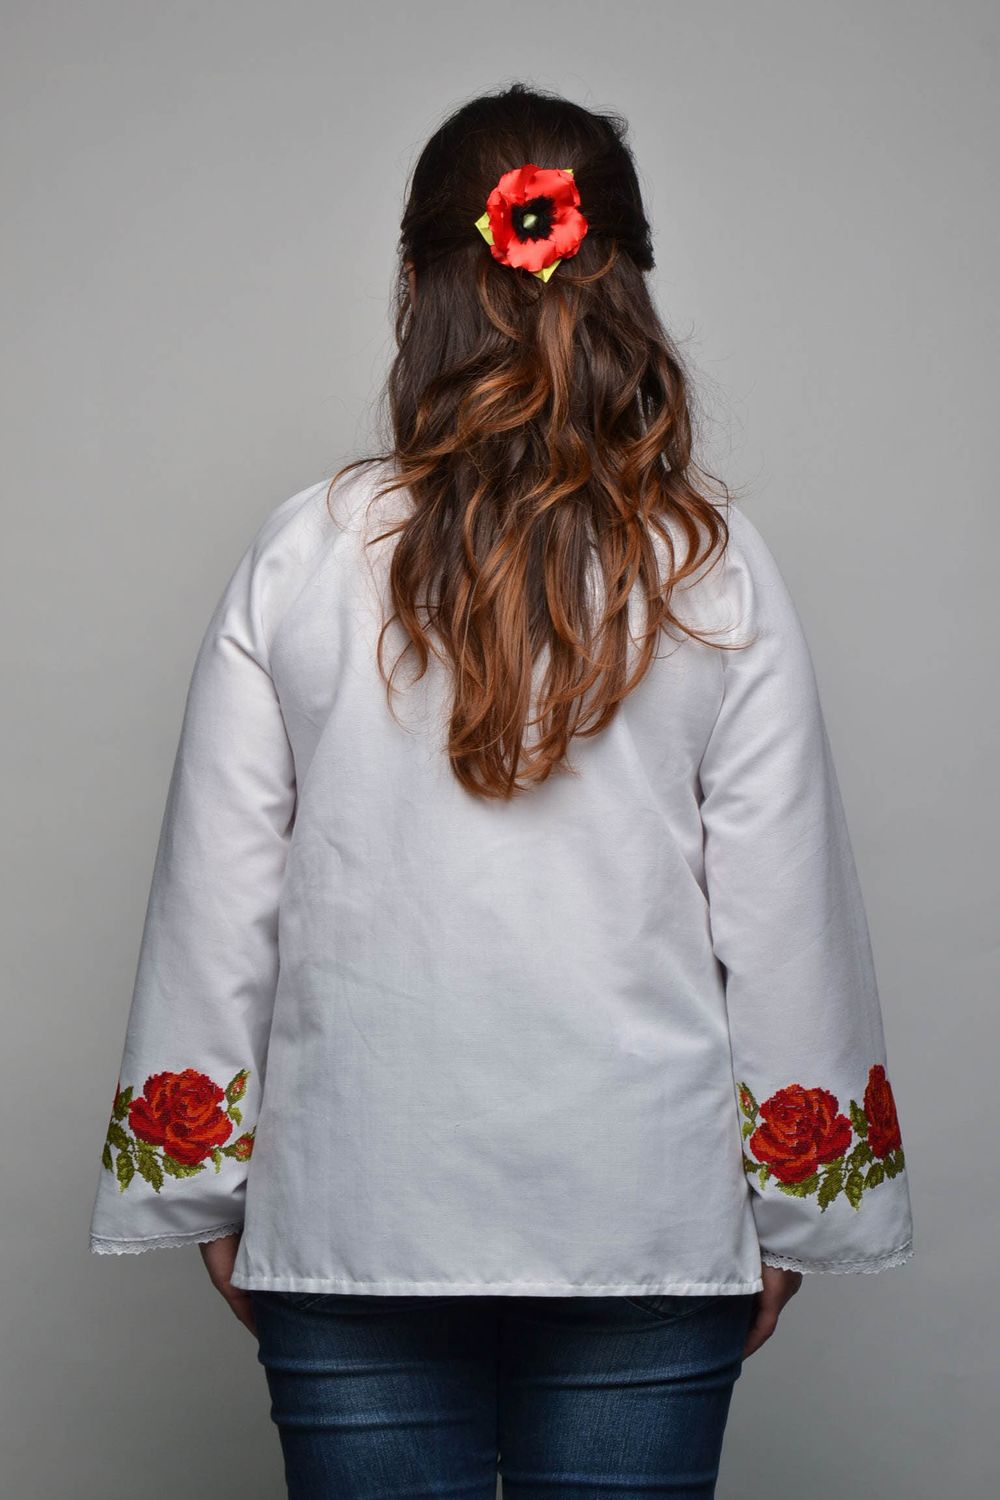 Women's embroidered blouse photo 4